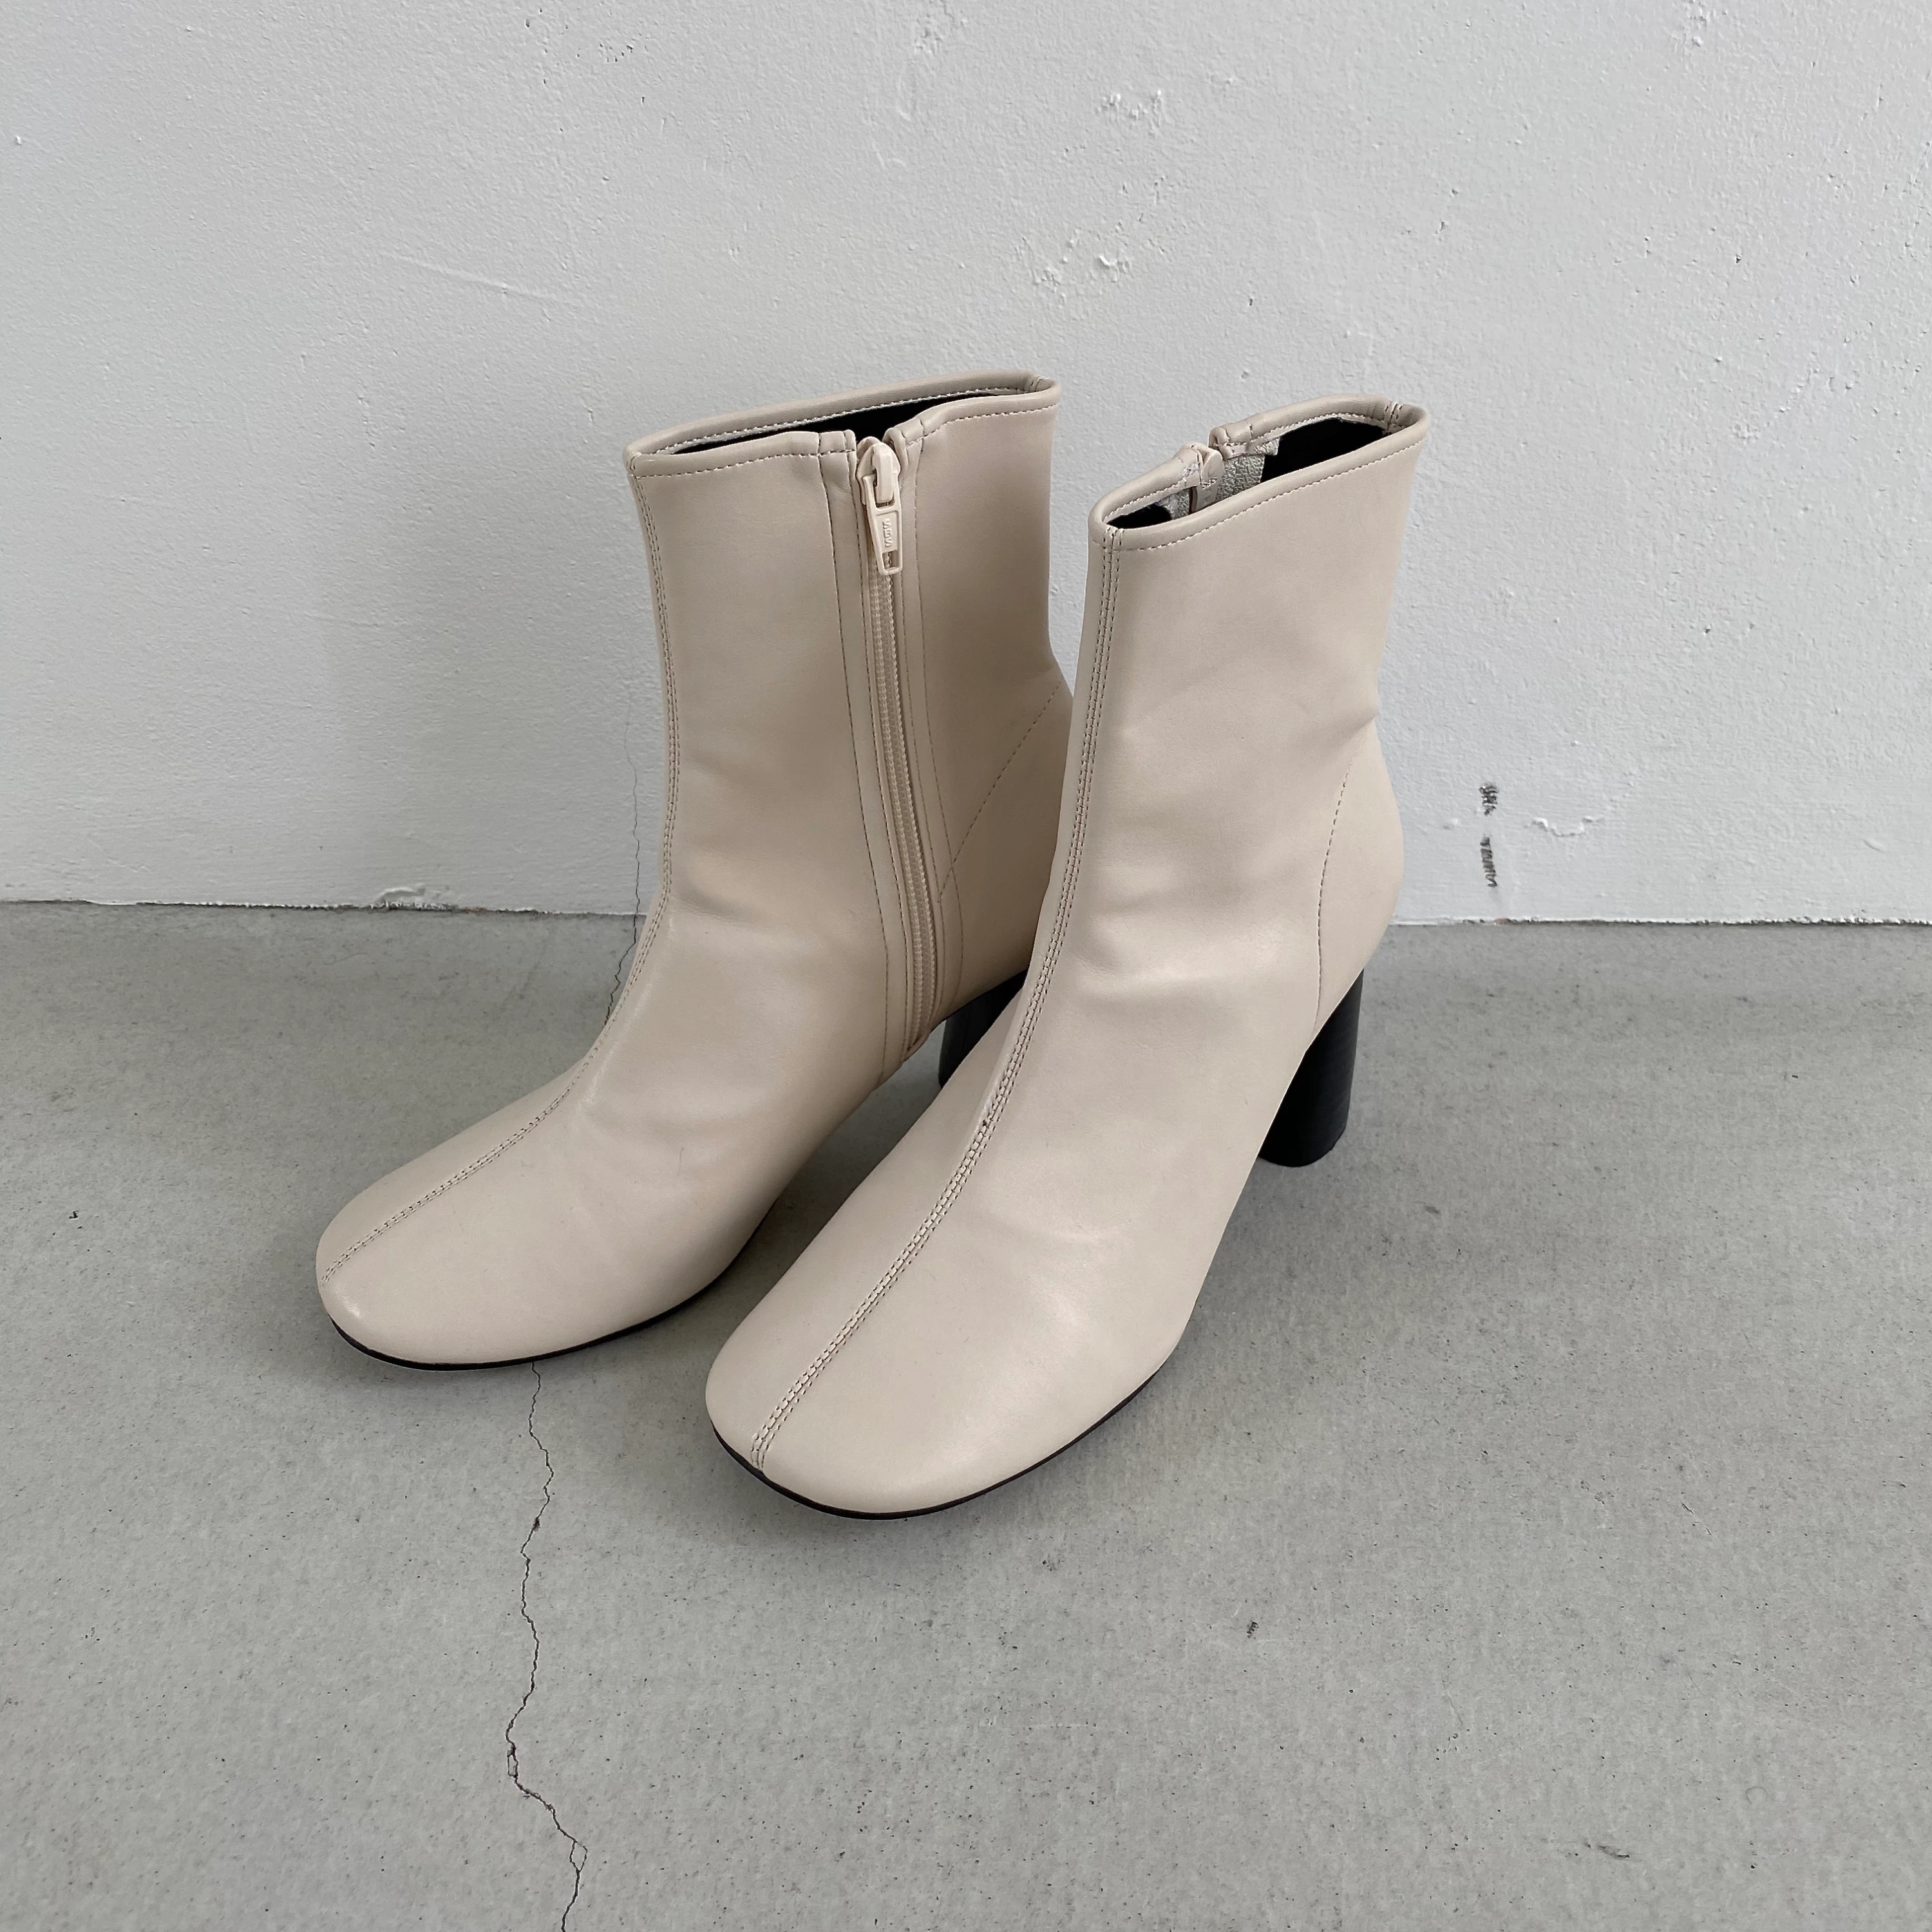 round toe bicolor heel boots / willfully（ウィルフリー）のshoes 